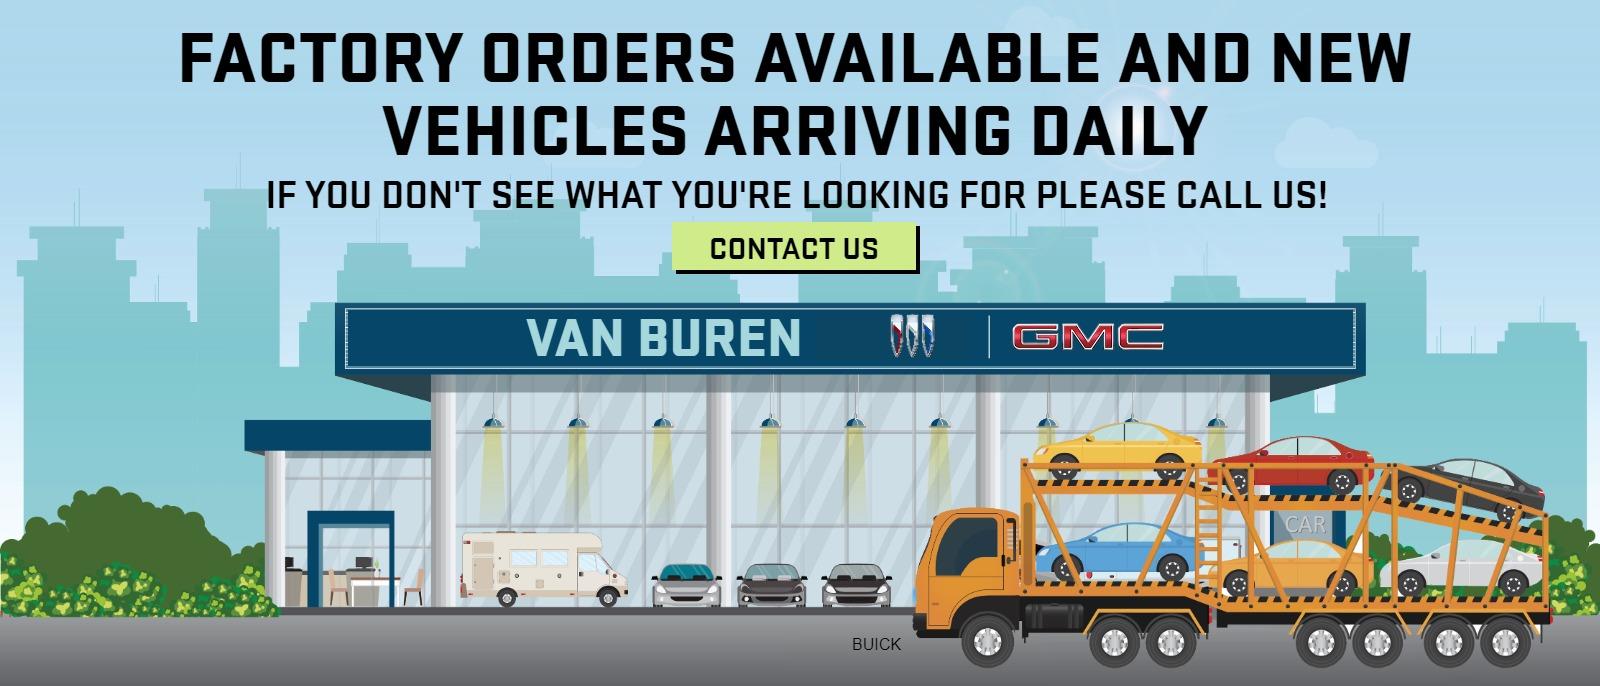 FACTORY ORDERS AVAILABLE AND NEW VEHICLES ARRIVING DAILY
IF YOU DON'T SEE WHAT YOU'RE LOOKING FOR PLEASE CALL US!